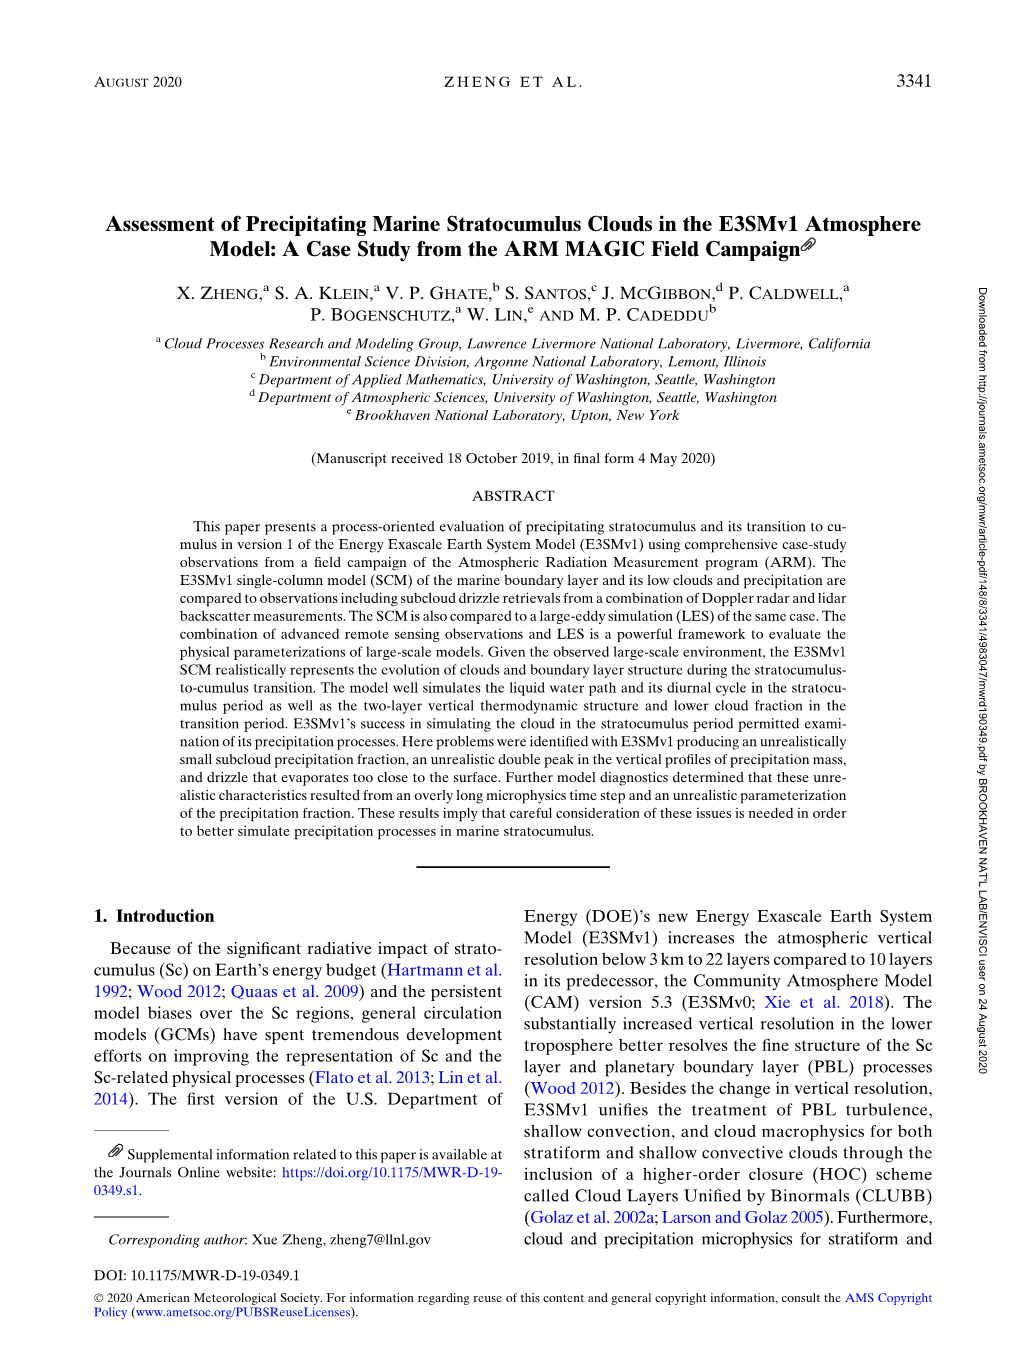 Assessment of Precipitating Marine Stratocumulus Clouds in the E3smv1 Atmosphere Model: a Case Study from the ARM MAGIC Field Campaign